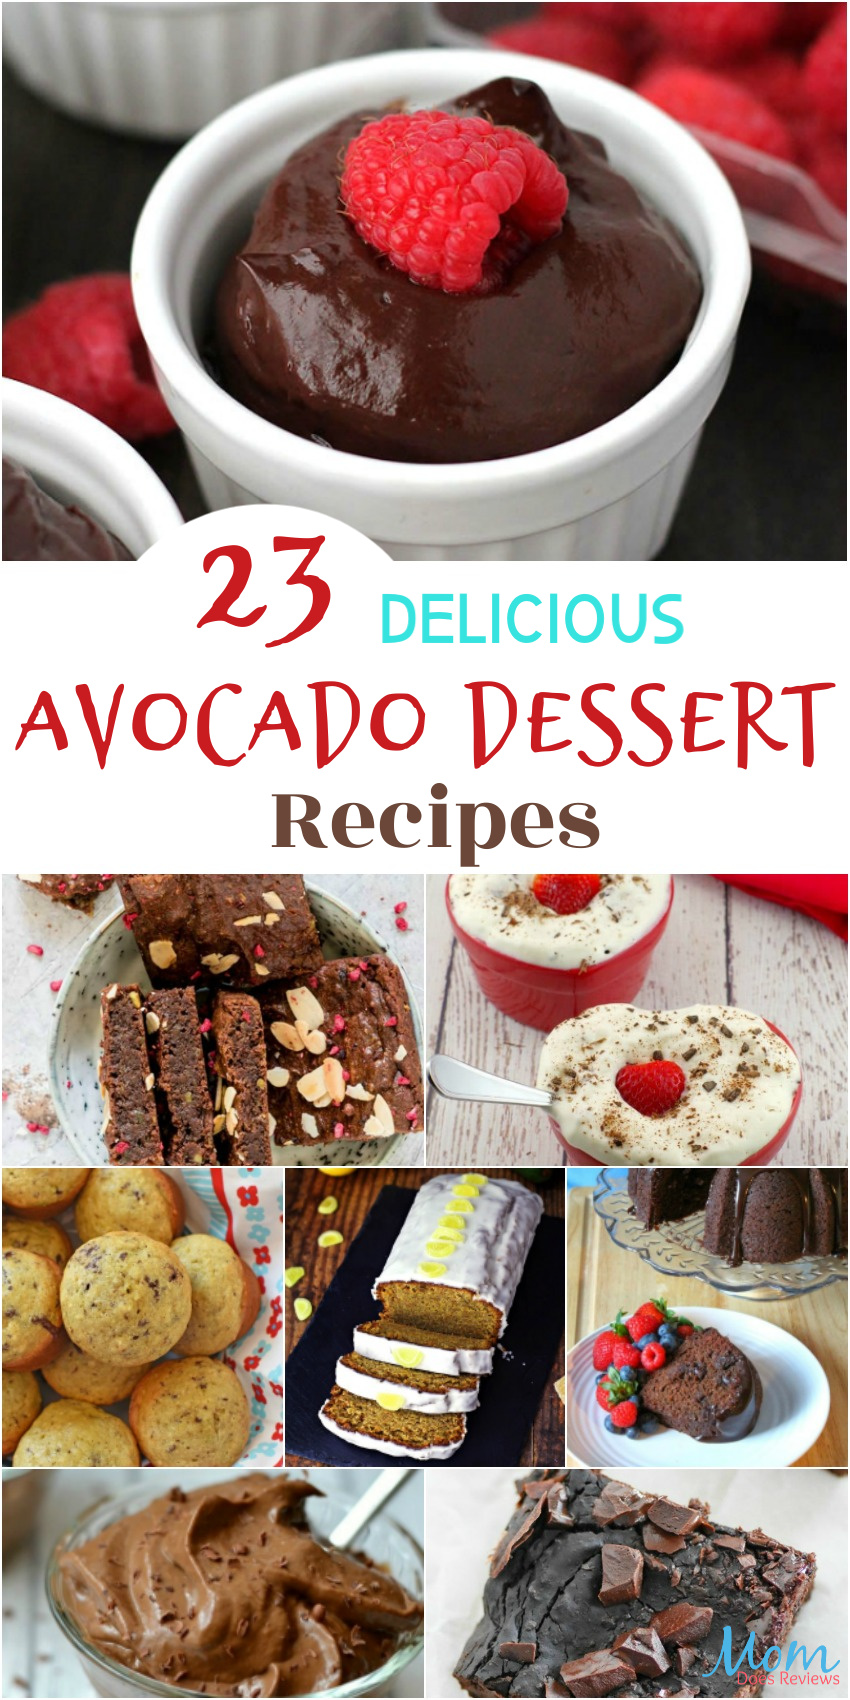 23 Delicious Avocado Dessert Recipes you will Absolutely Love #recipes #desserts #sweets #avocado #getinmybelly